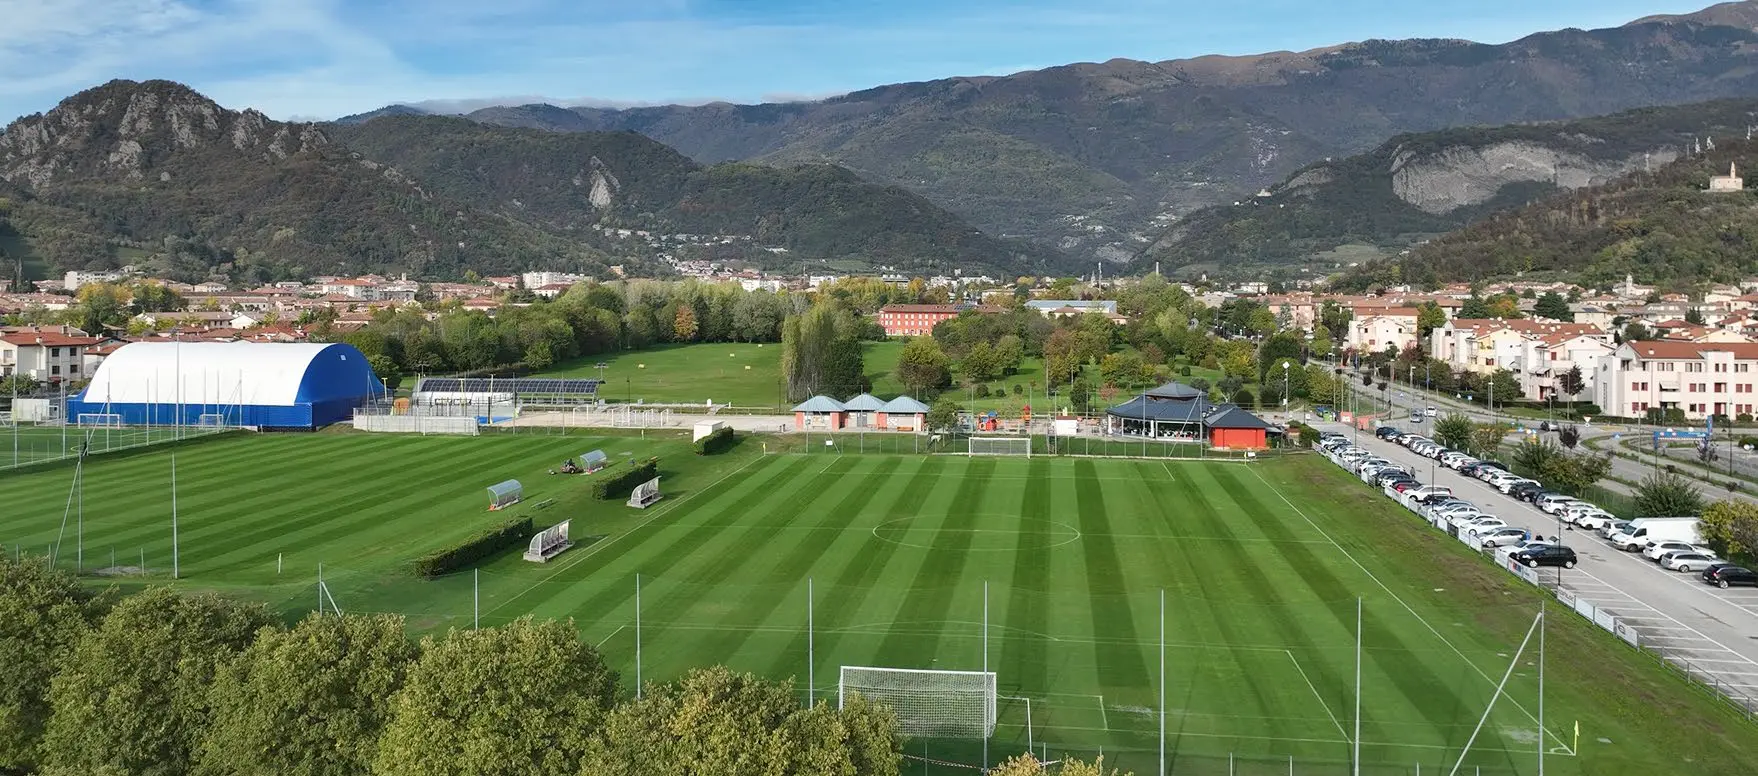 View of the soccer fields of the Marcopolo Sports Centre in Vittorio Veneto TV Italy